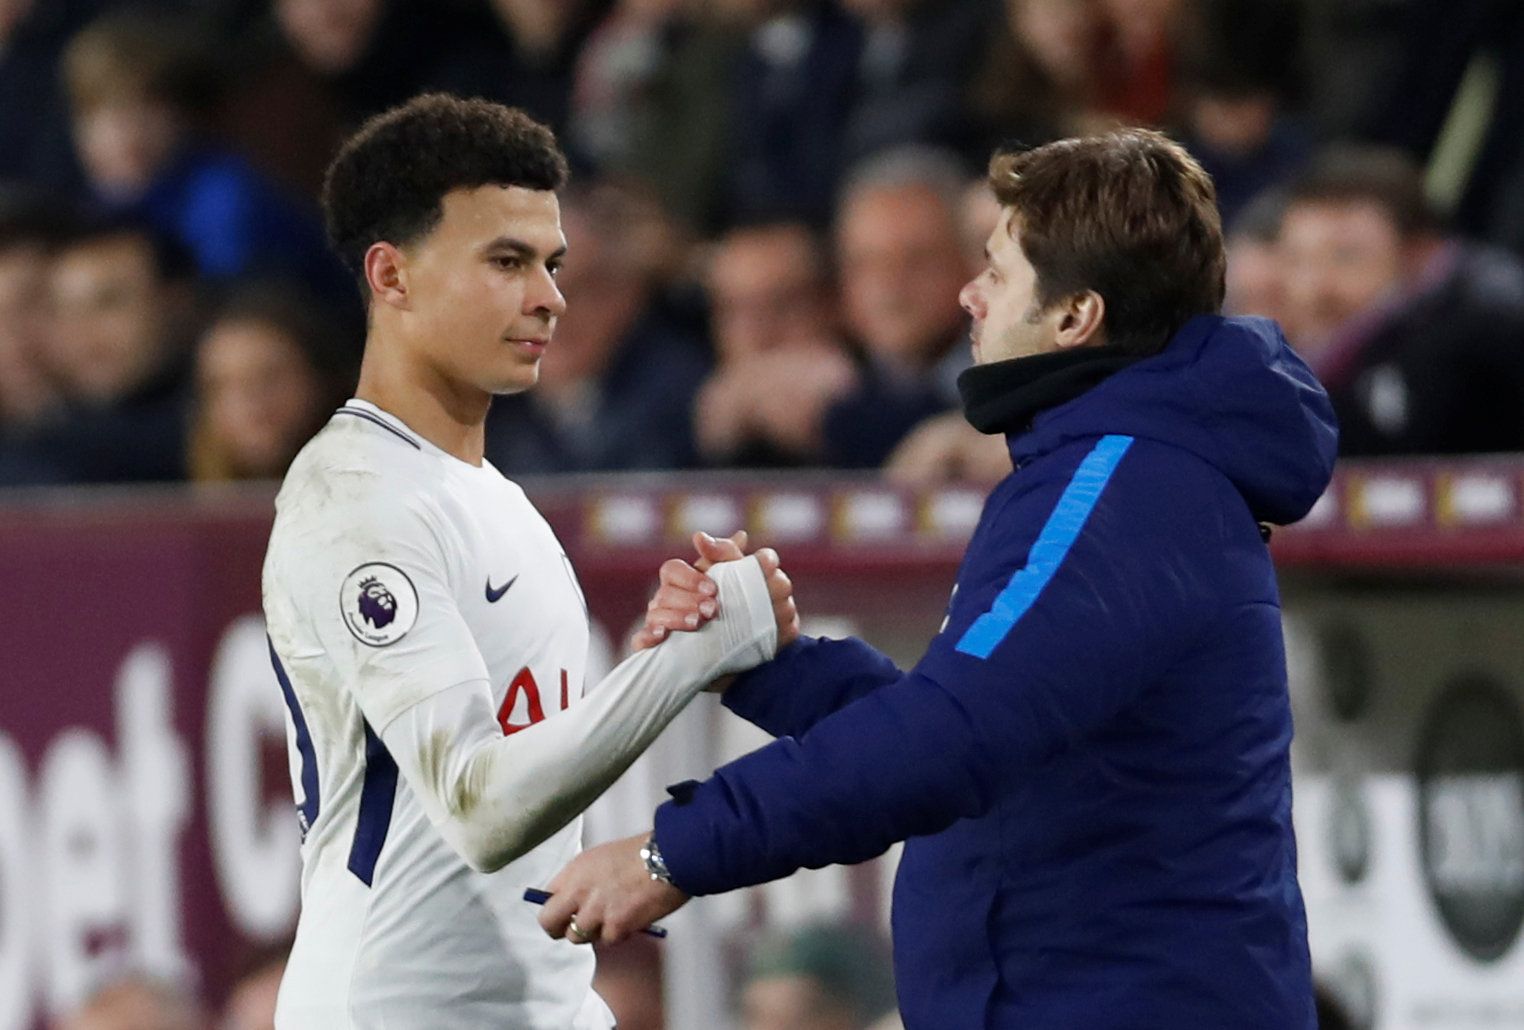 Soccer Football - Premier League - Burnley vs Tottenham Hotspur - Turf Moor, Burnley, Britain - December 23, 2017   Tottenham's Dele Alli with Tottenham manager Mauricio Pochettino after he is substituted   Action Images via Reuters/Paul Childs    EDITORIAL USE ONLY. No use with unauthorized audio, video, data, fixture lists, club/league logos or "live" services. Online in-match use limited to 75 images, no video emulation. No use in betting, games or single club/league/player publications.  Ple